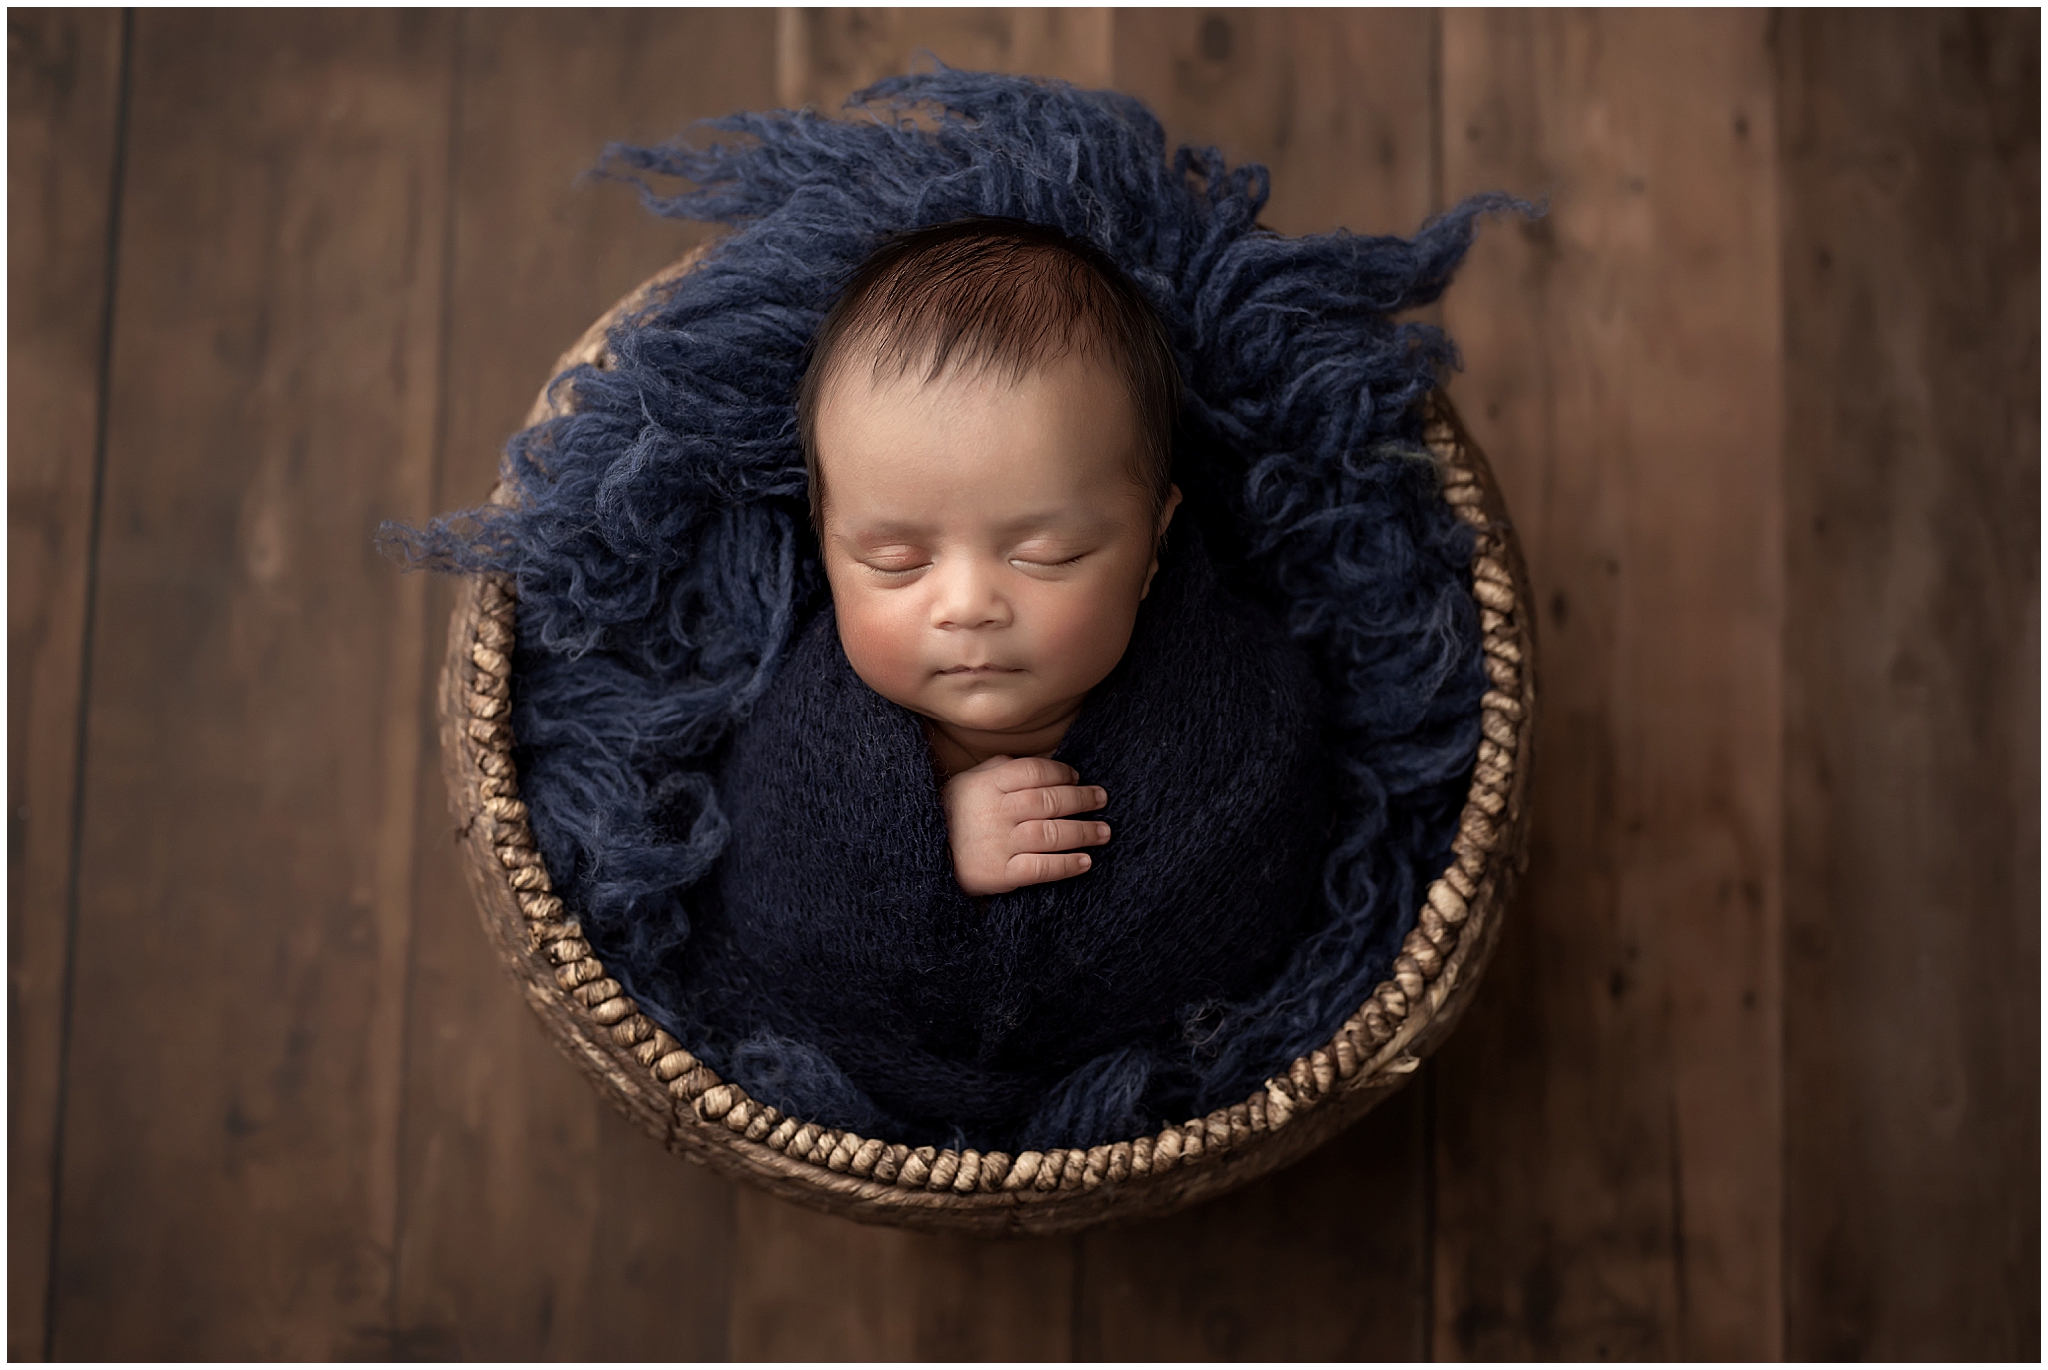 newborn baby boy wrapped and sleeping in baskiet  during newborn photography session at london ontario studio